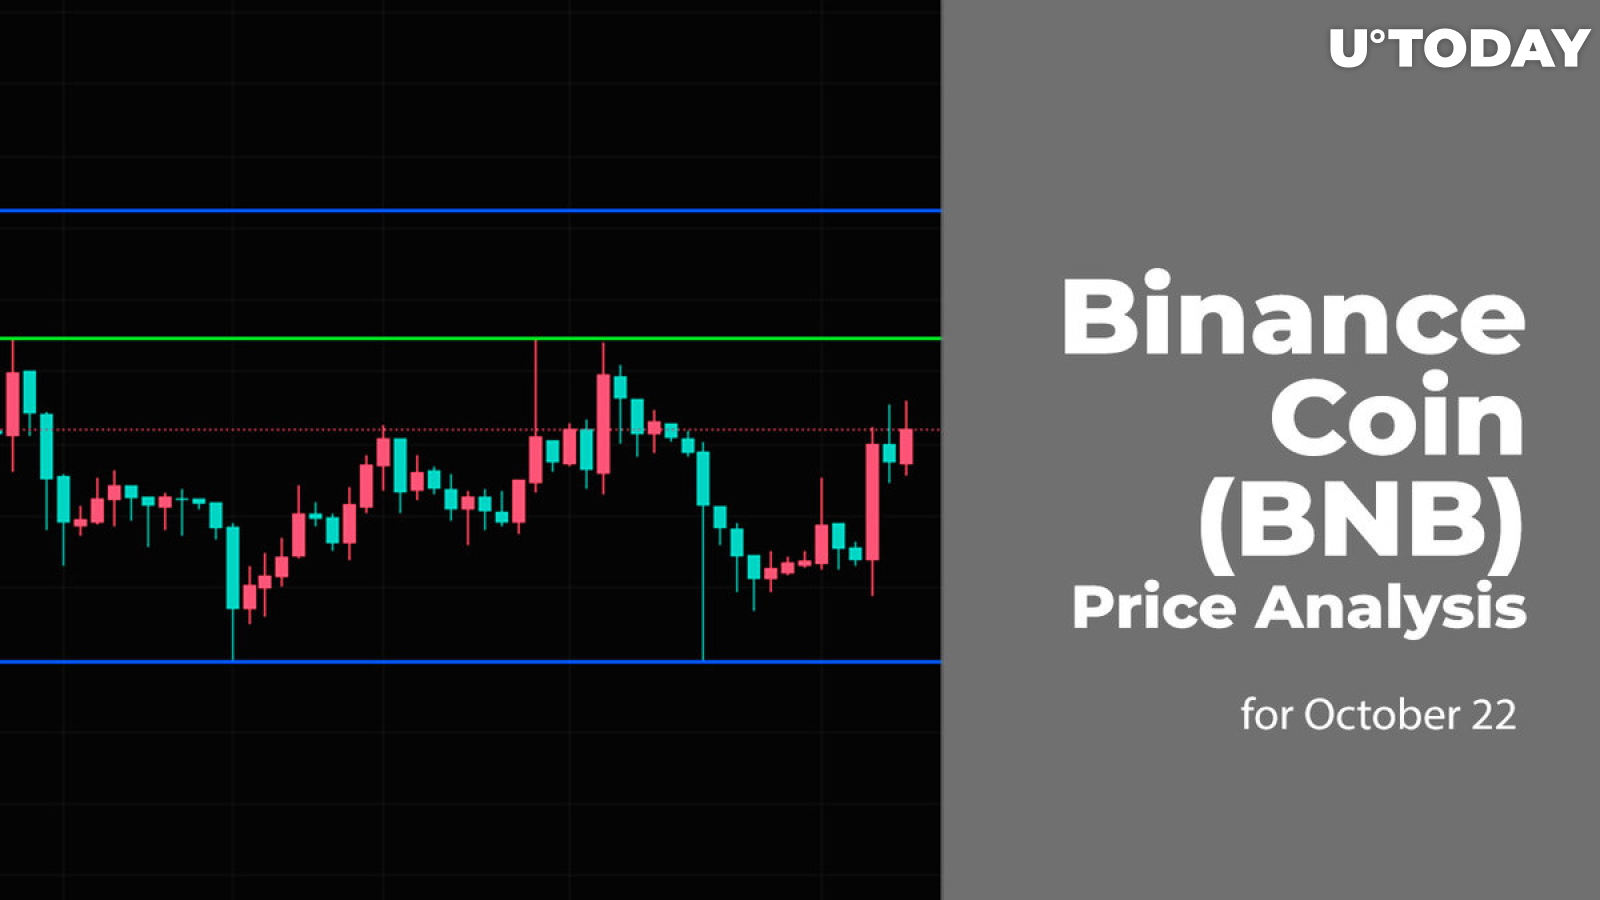 Binance Coin (BNB) Price Analysis for October 22